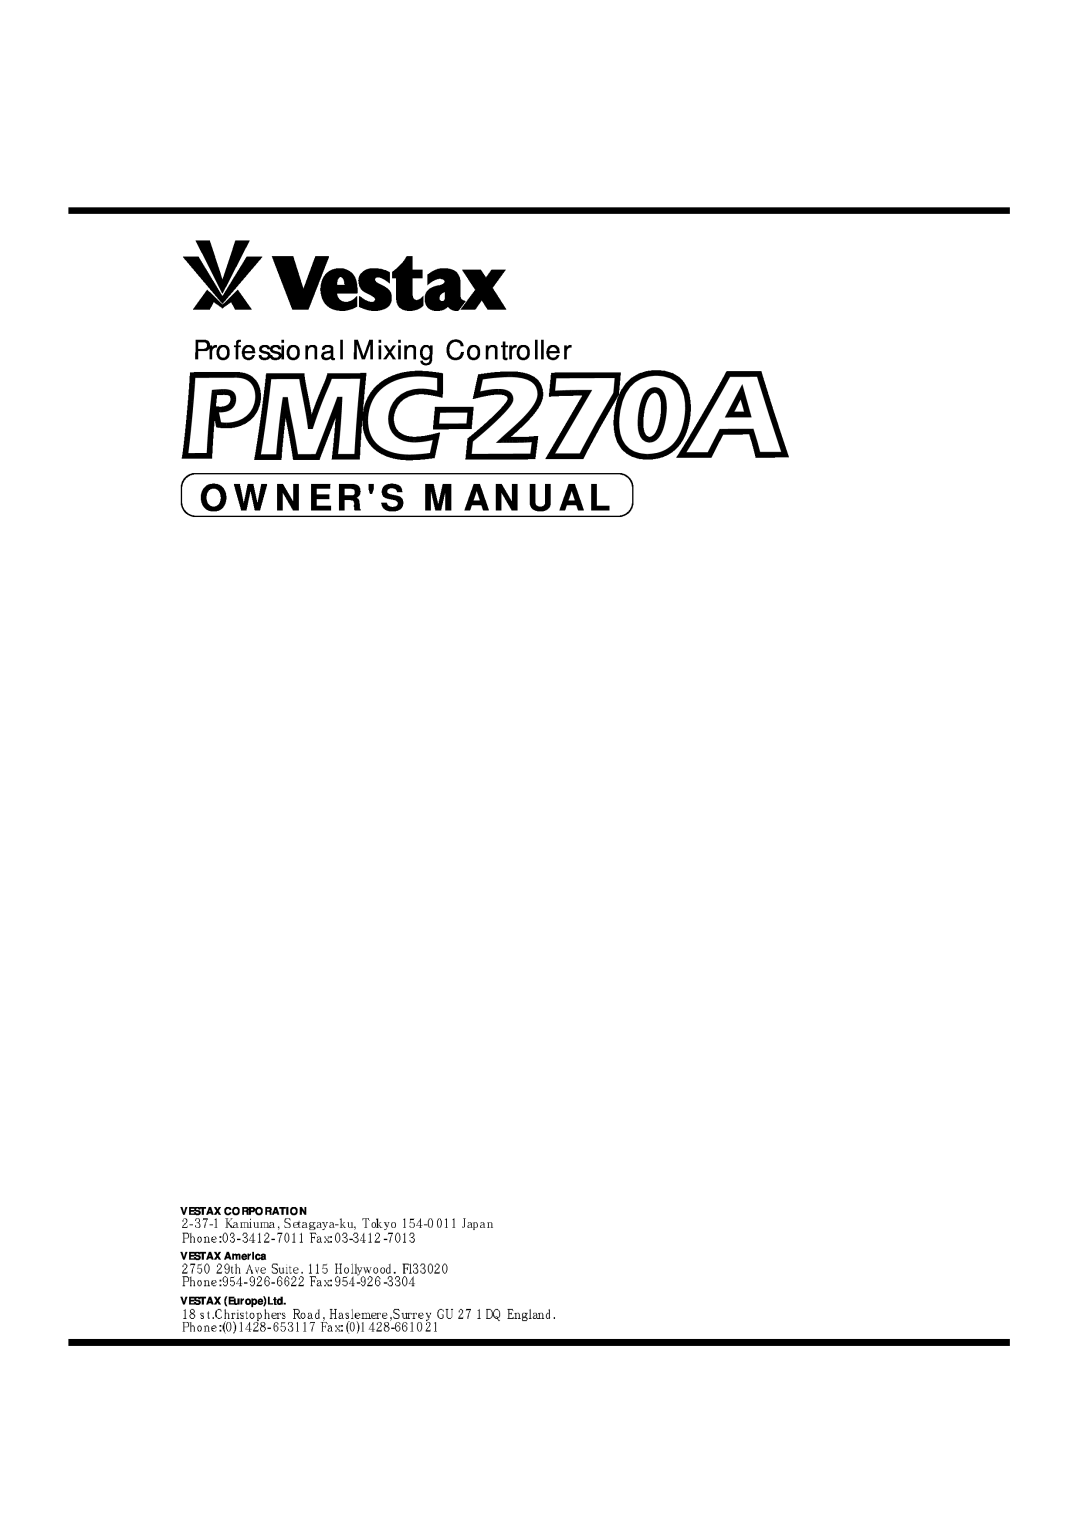 Vestax PMC-270A owner manual Owners Manual, Professional Mixing Controller, VESTAX CORPORATION VESTAX America 